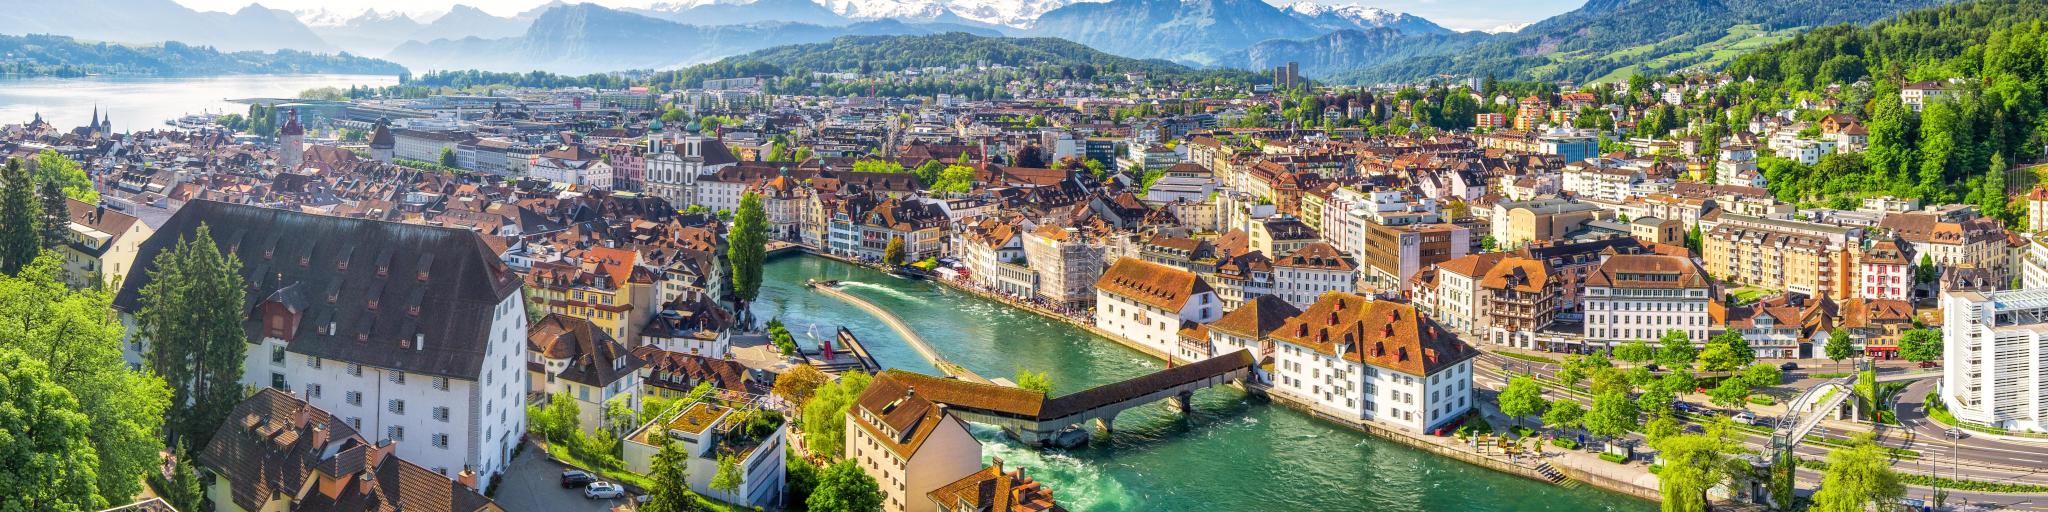 Historic city center of Lucerne with famous Chapel Bridge and lake Lucerne (Vierwaldstattersee), Canton of Luzern, Switzerland